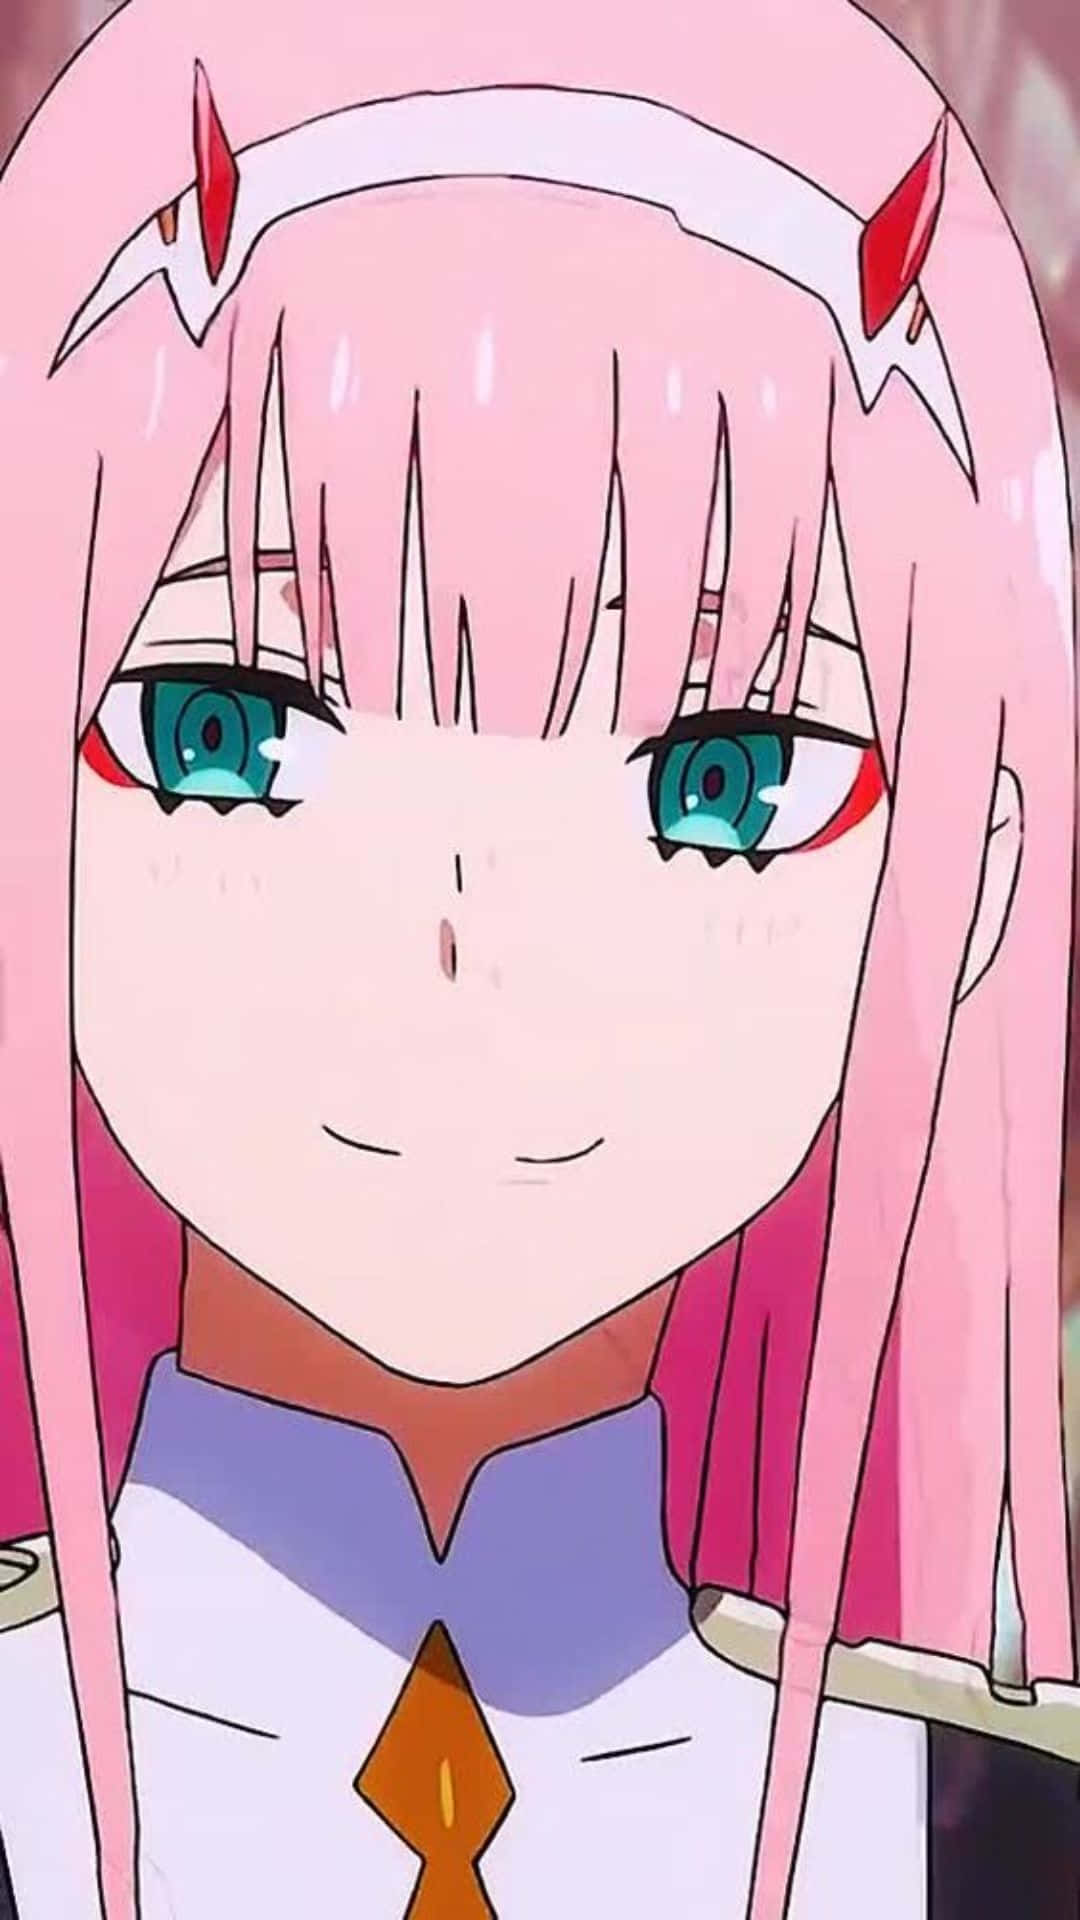 The iconic Zero Two in her signature gothic style.